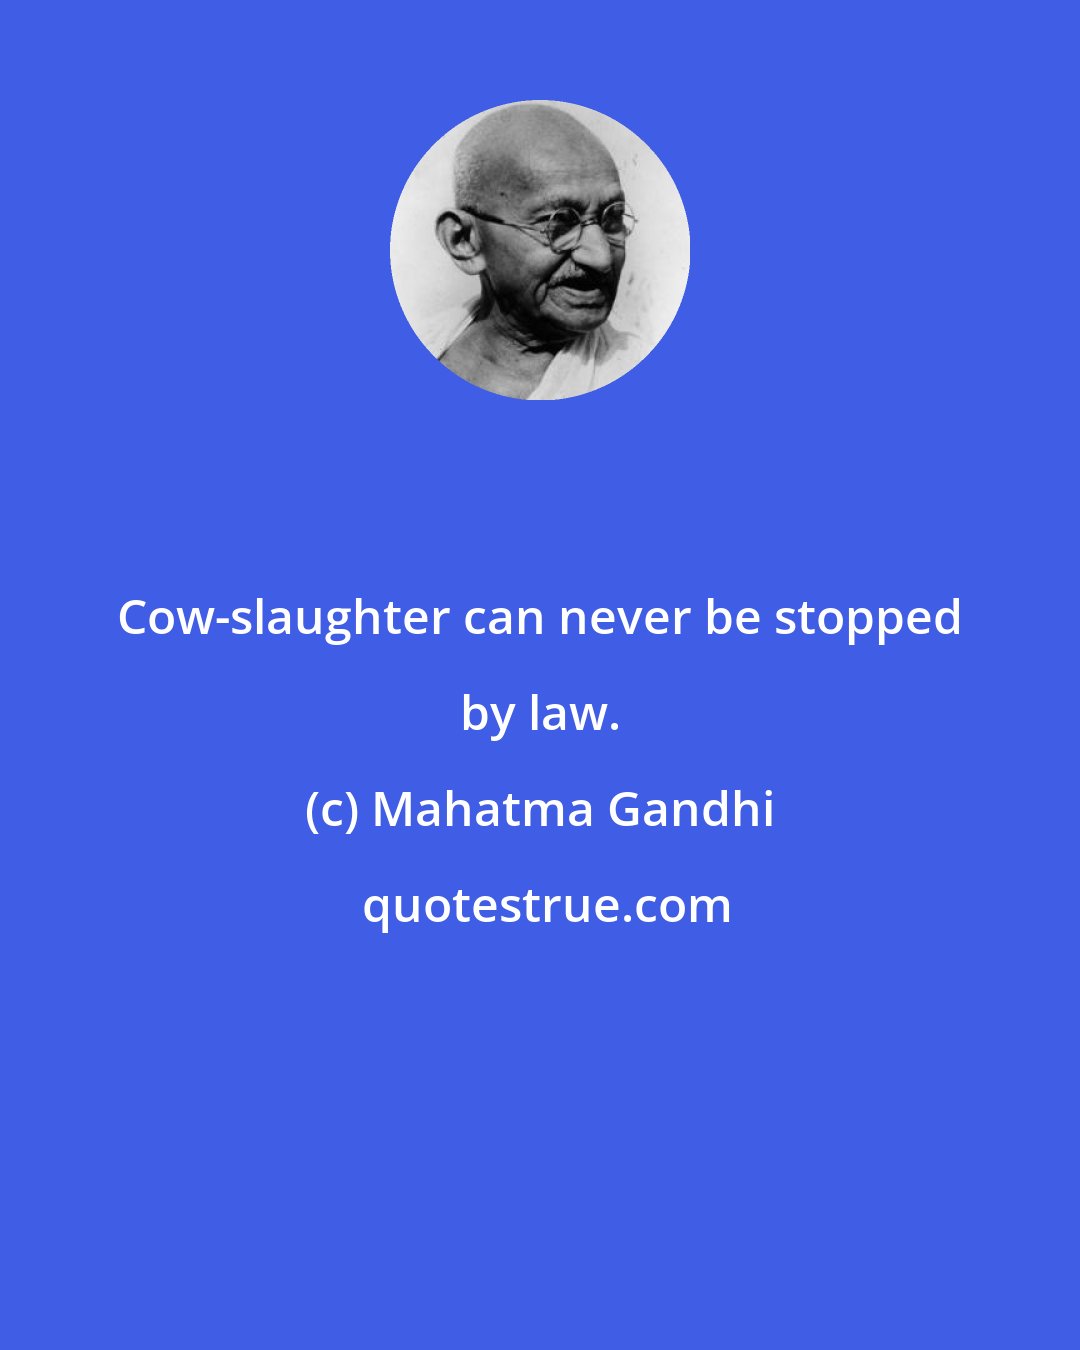 Mahatma Gandhi: Cow-slaughter can never be stopped by law.